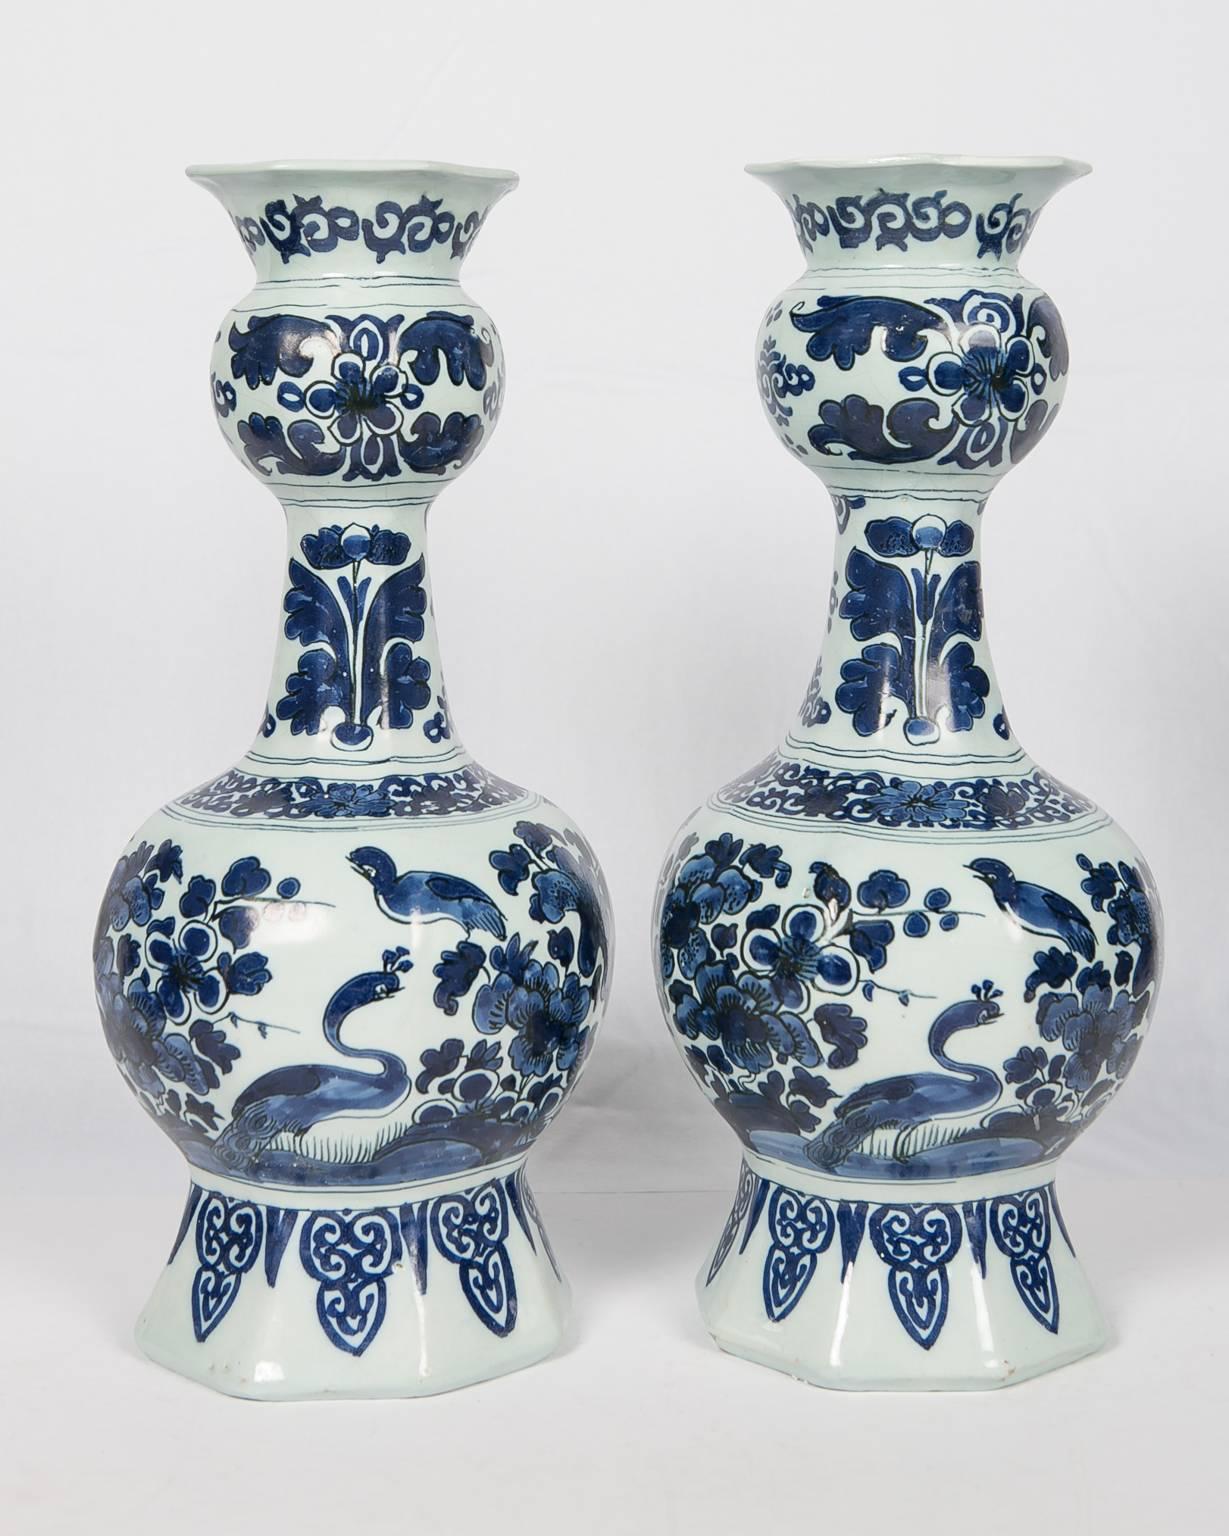 We are pleased to offer this pair of blue and white delft vases painted in dark cobalt blue with an all-around design
of peacocks, songbirds singing to the peacocks, and a large peony in a flower-filled garden.
The shoulder and top of each vase is